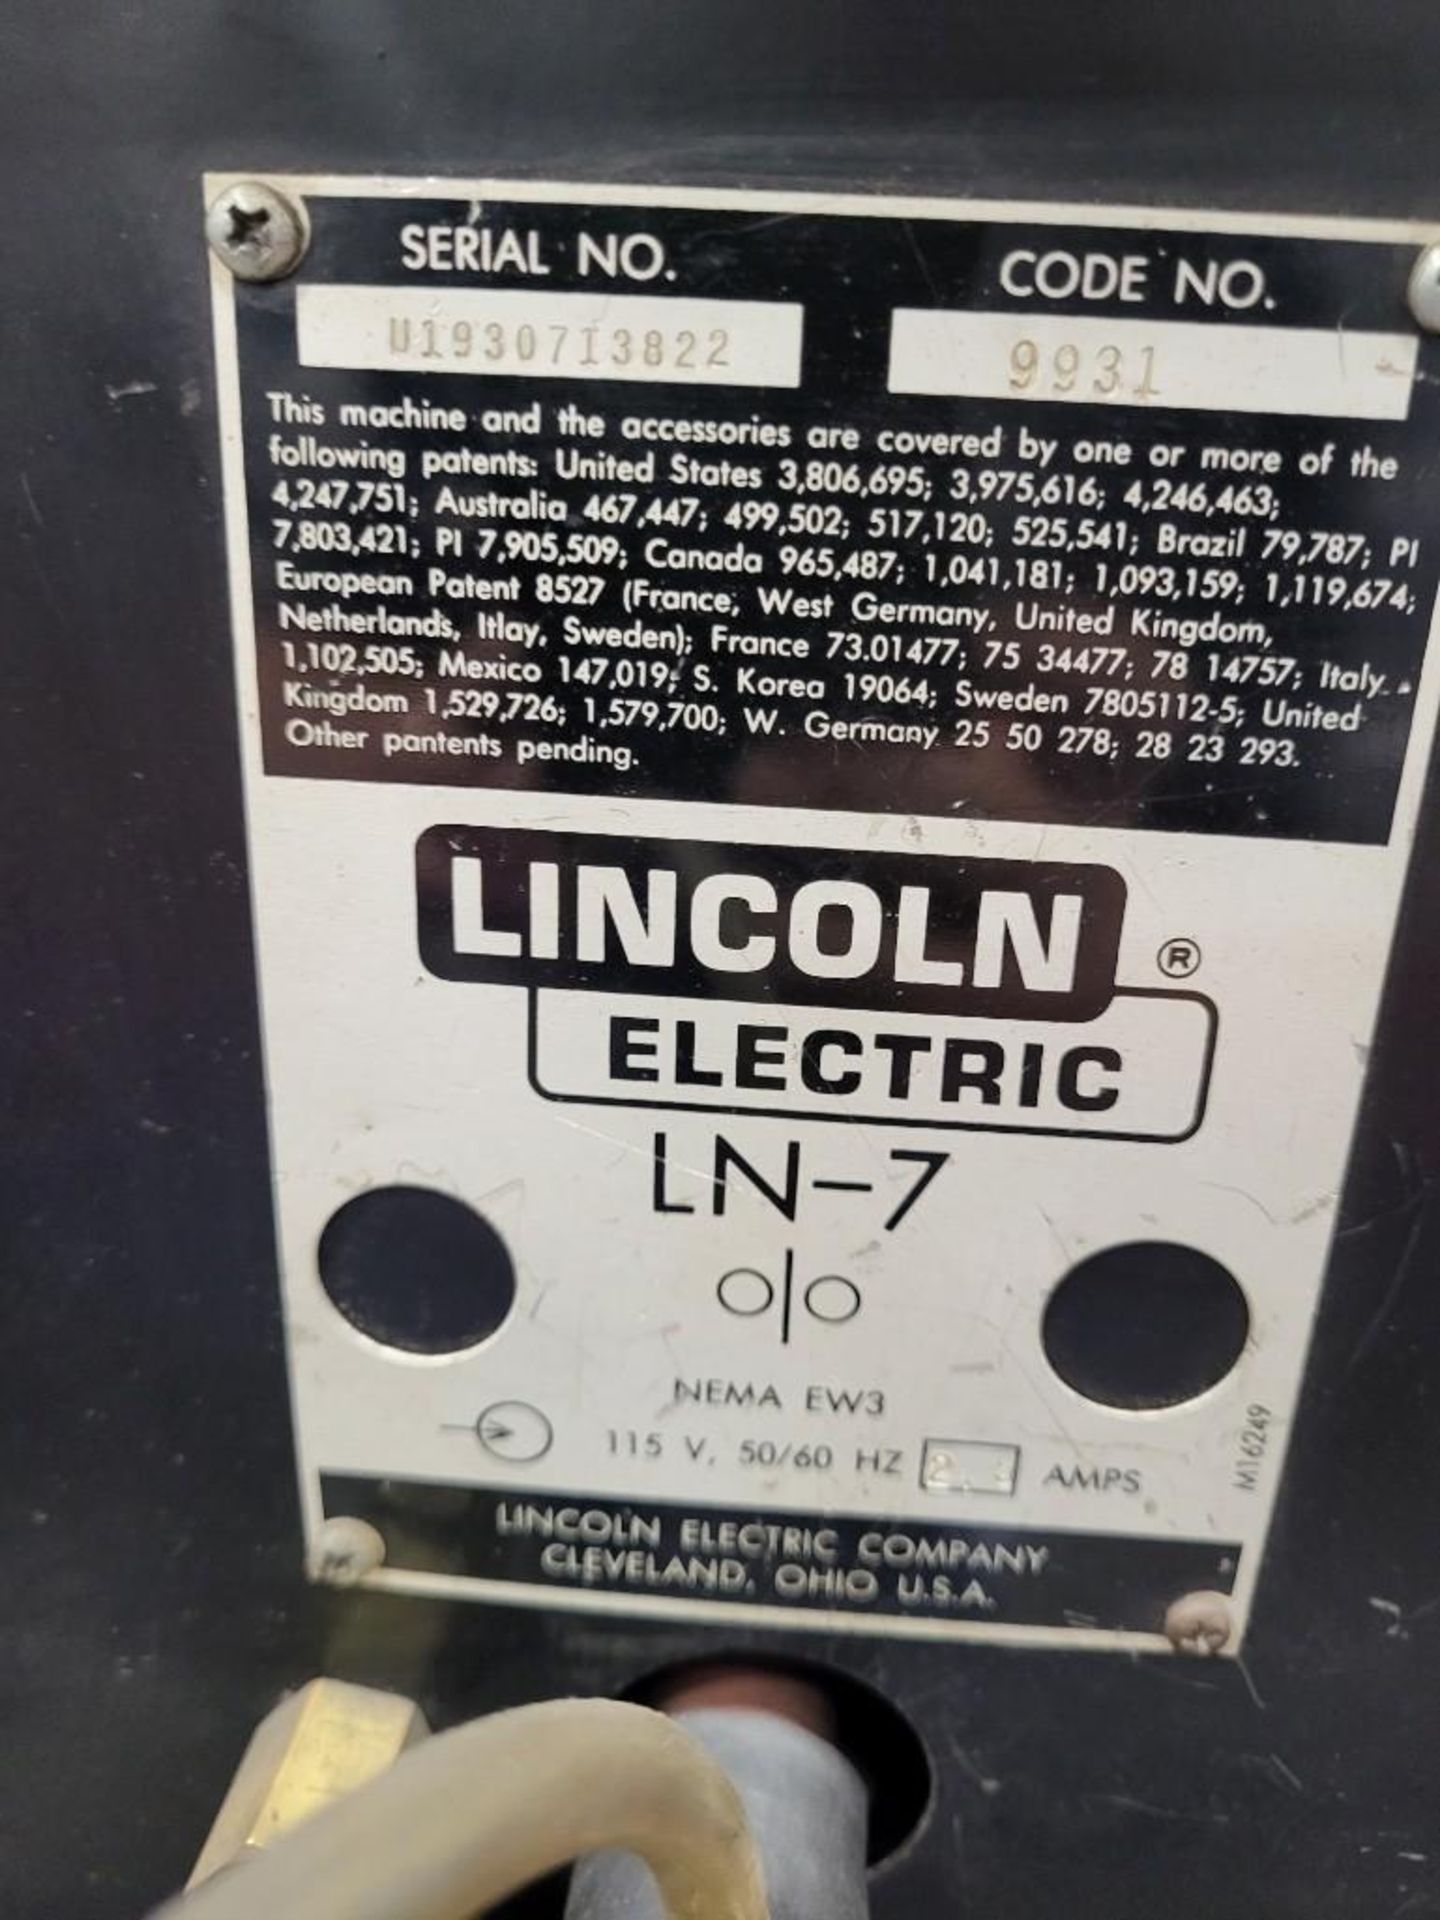 LINCOLN ELECTRIC IDEALARC DC-400 MULTIPROCESS WELDER WITH LN-7 WIRE FEEDER - Image 10 of 10